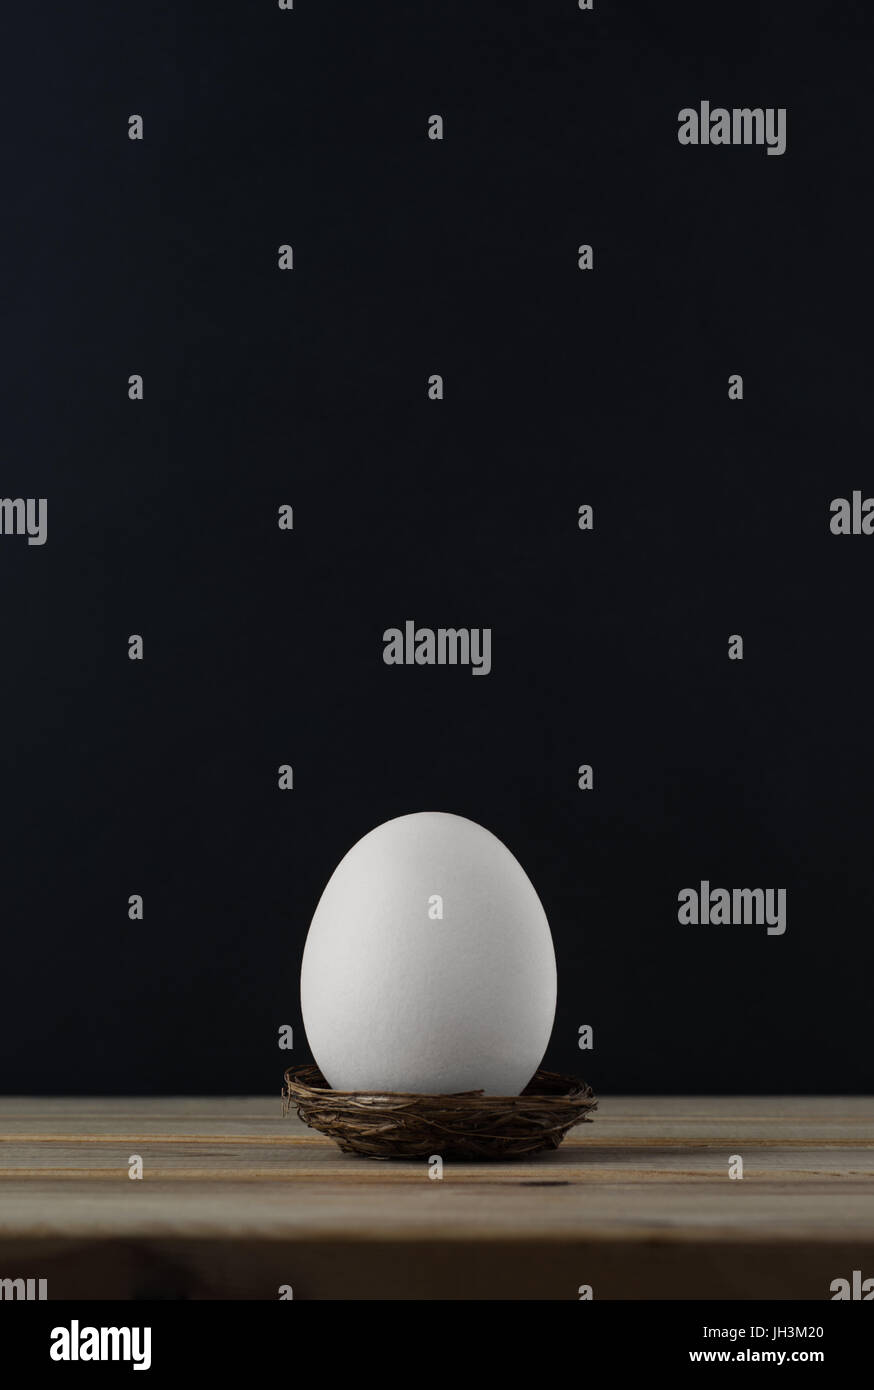 An upright chicken's egg (whitened) in small nest on wood plank table.  Black chalkboard background provides copy space above. Stock Photo